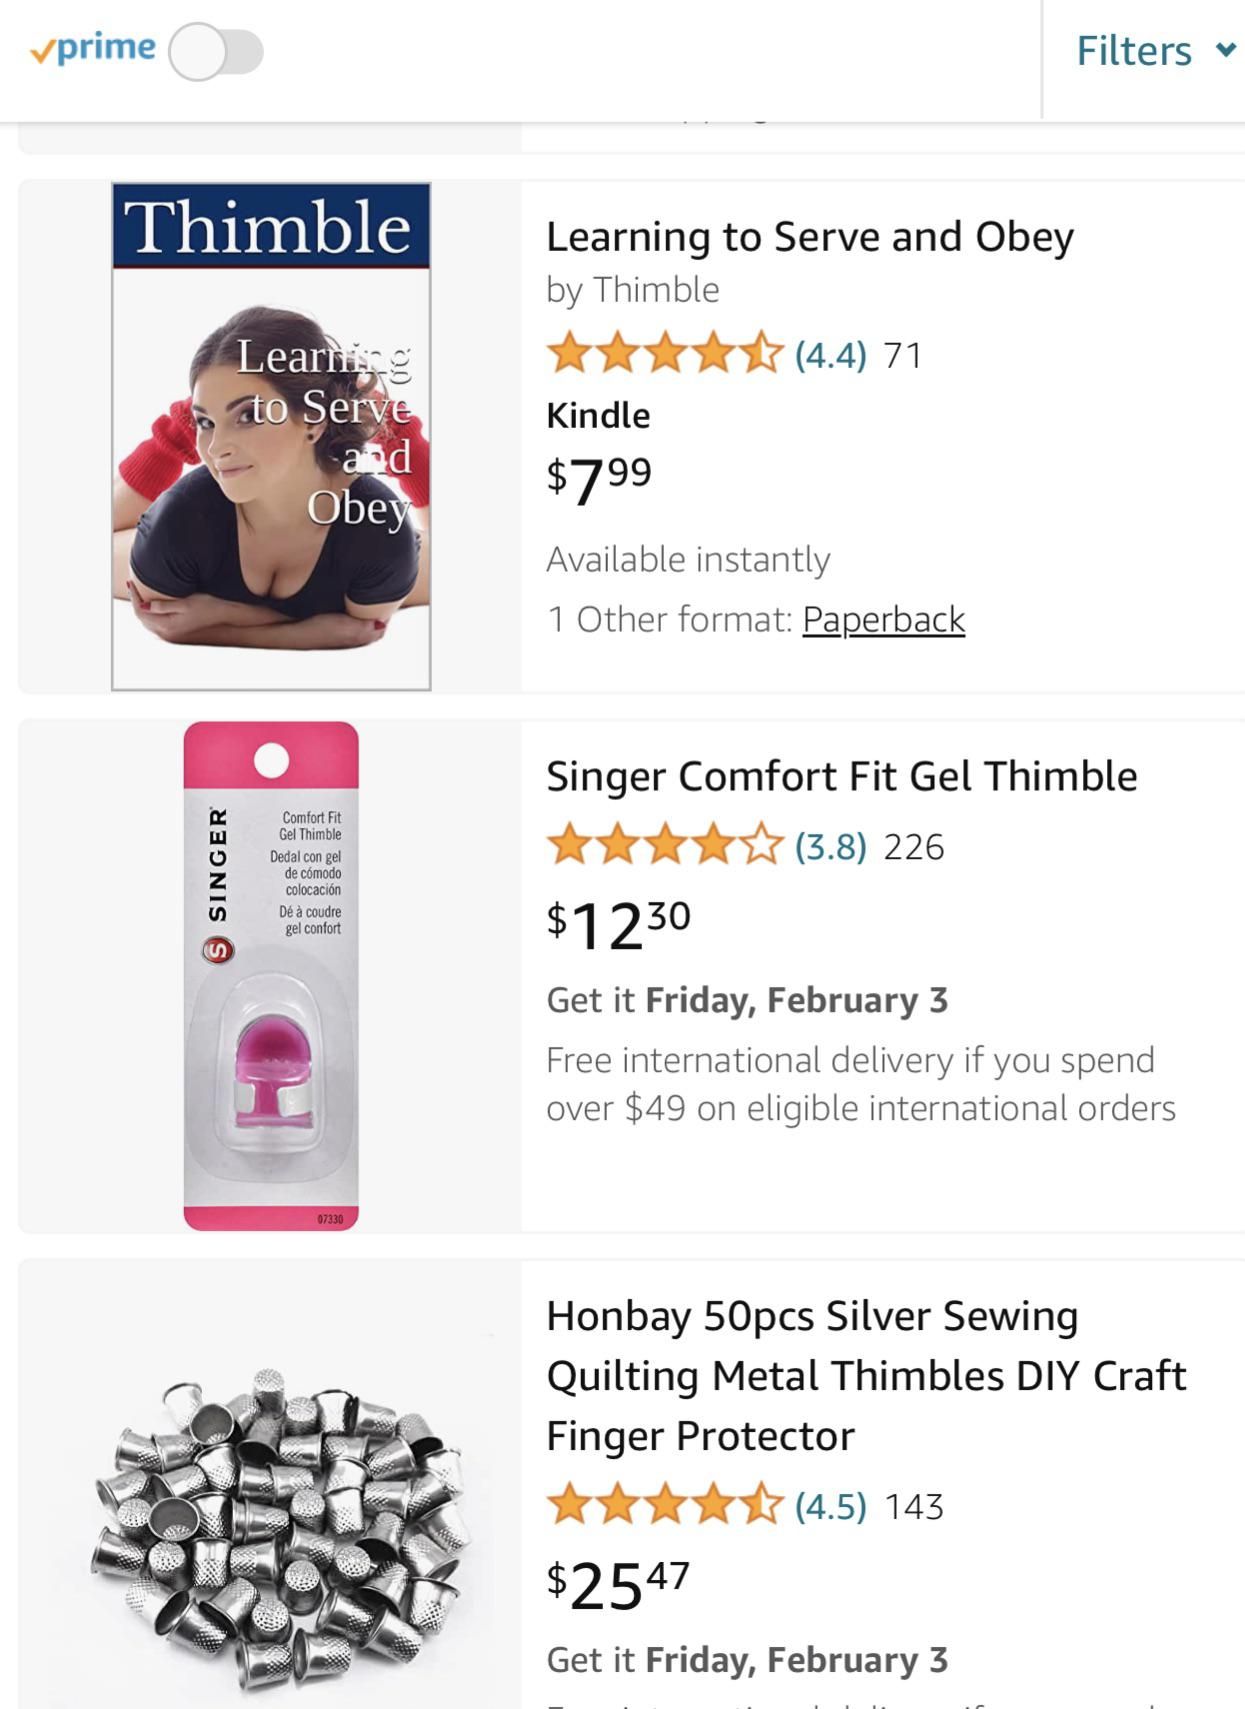 Settle down Amazon. I just need a thimble to complete a craft project.